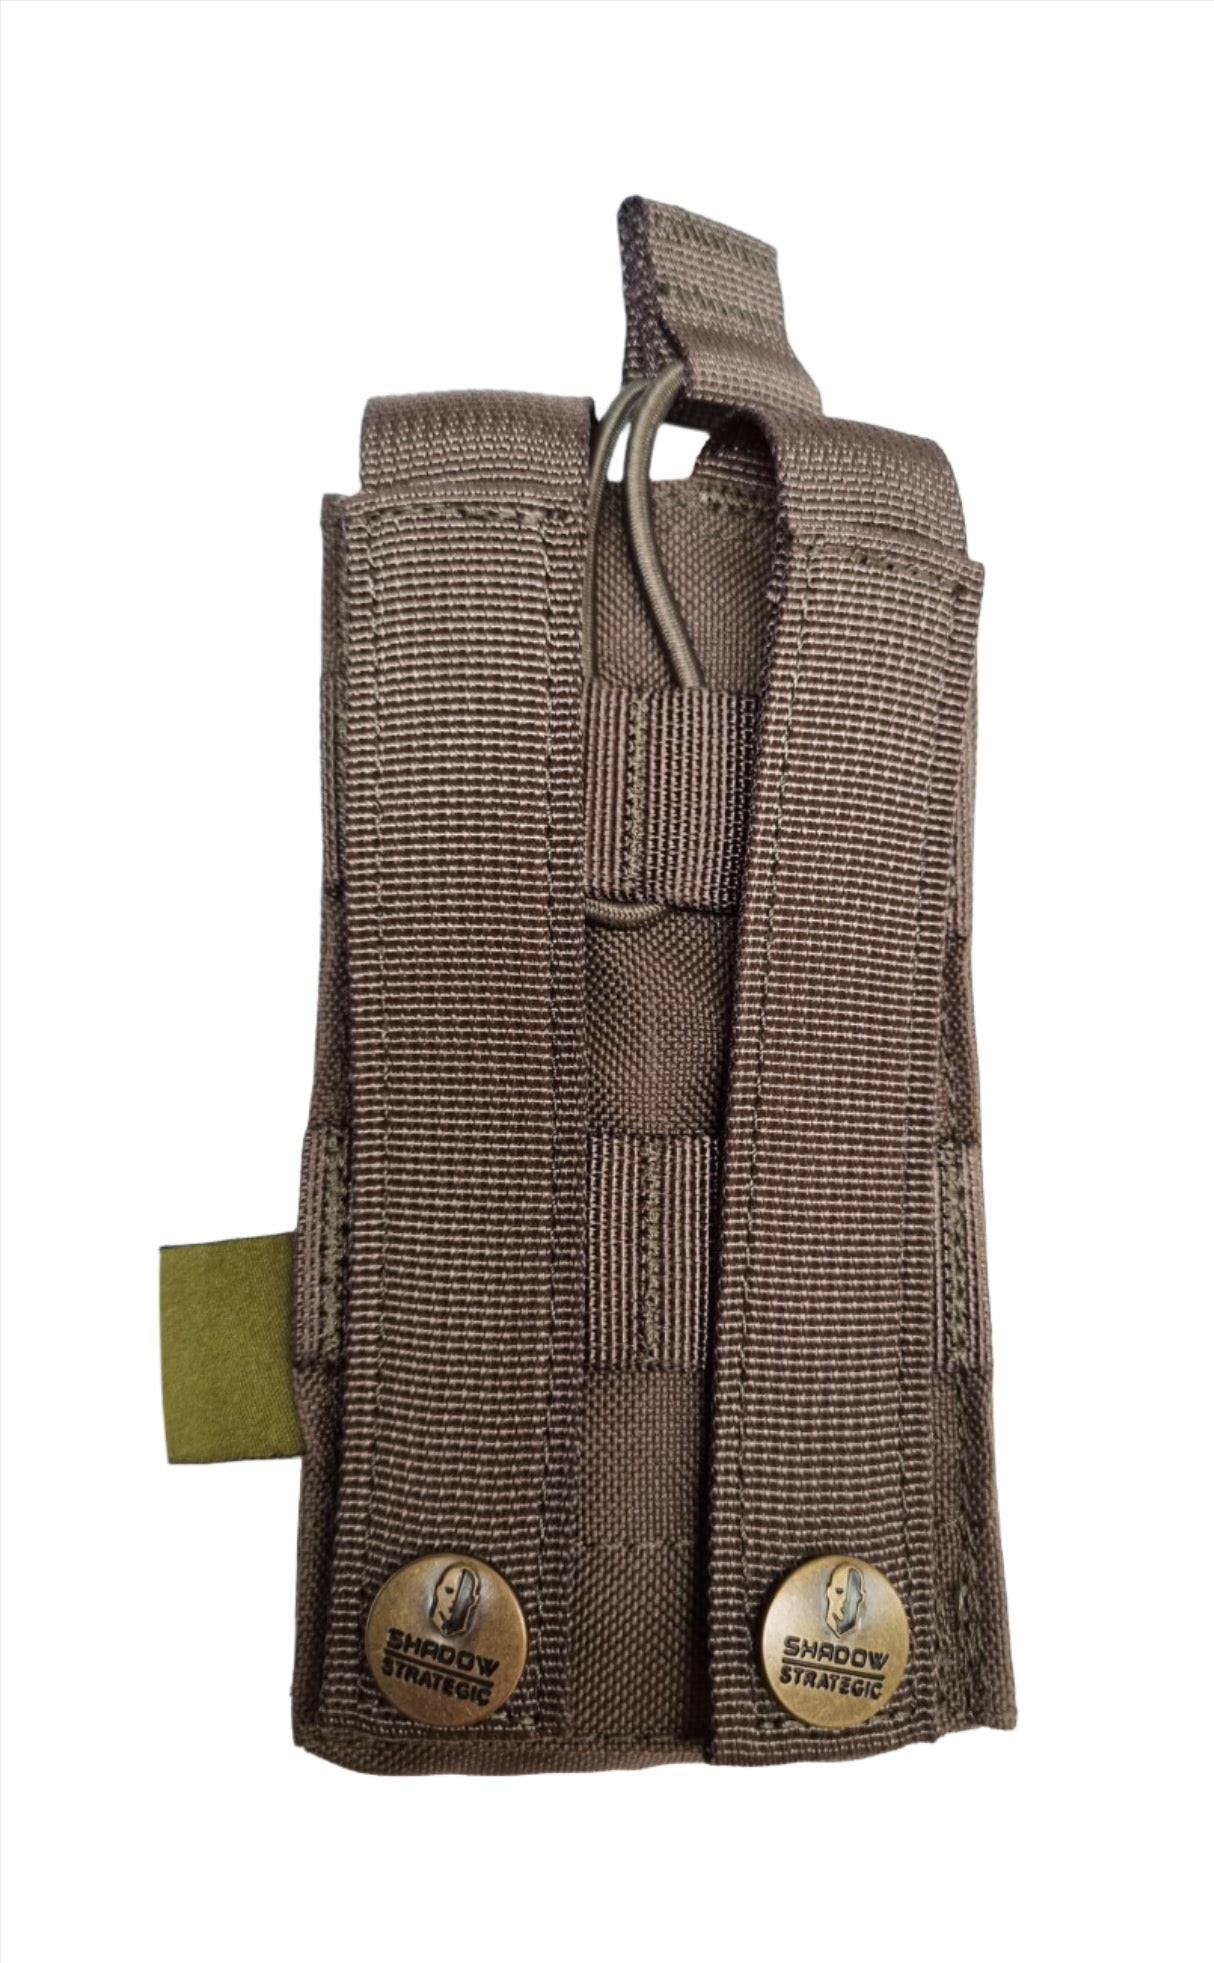 SHS - 1090 STACKER OPEN-TOP MAG POUCH SINGLE COLOUR ARMY GREEN